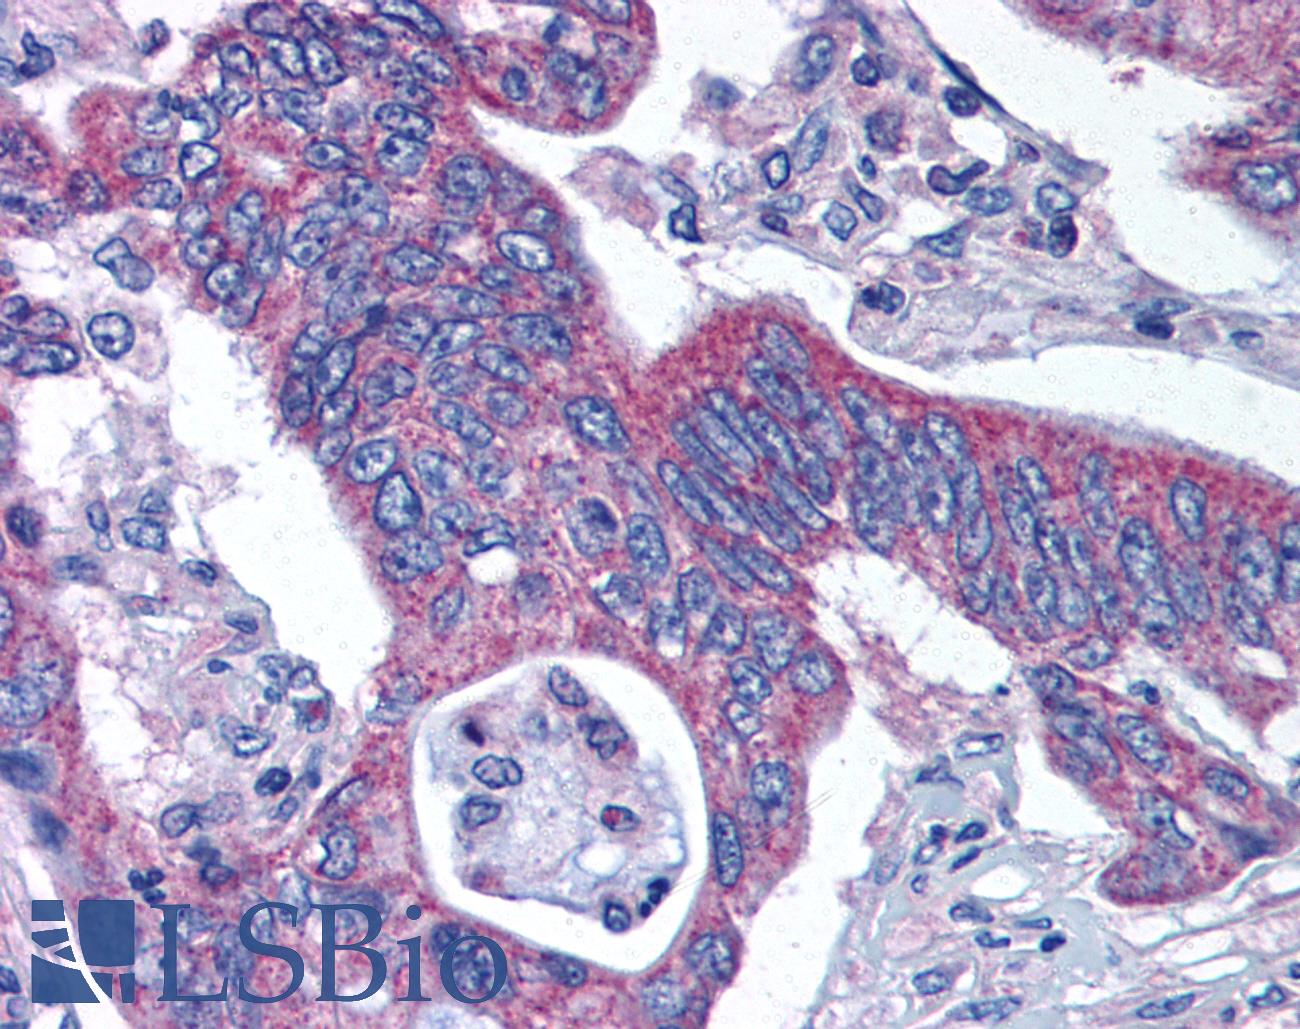 KATII / AADAT Antibody - Anti-KATII / AADAT antibody IHC of human Colon, Carcinoma. Immunohistochemistry of formalin-fixed, paraffin-embedded tissue after heat-induced antigen retrieval.